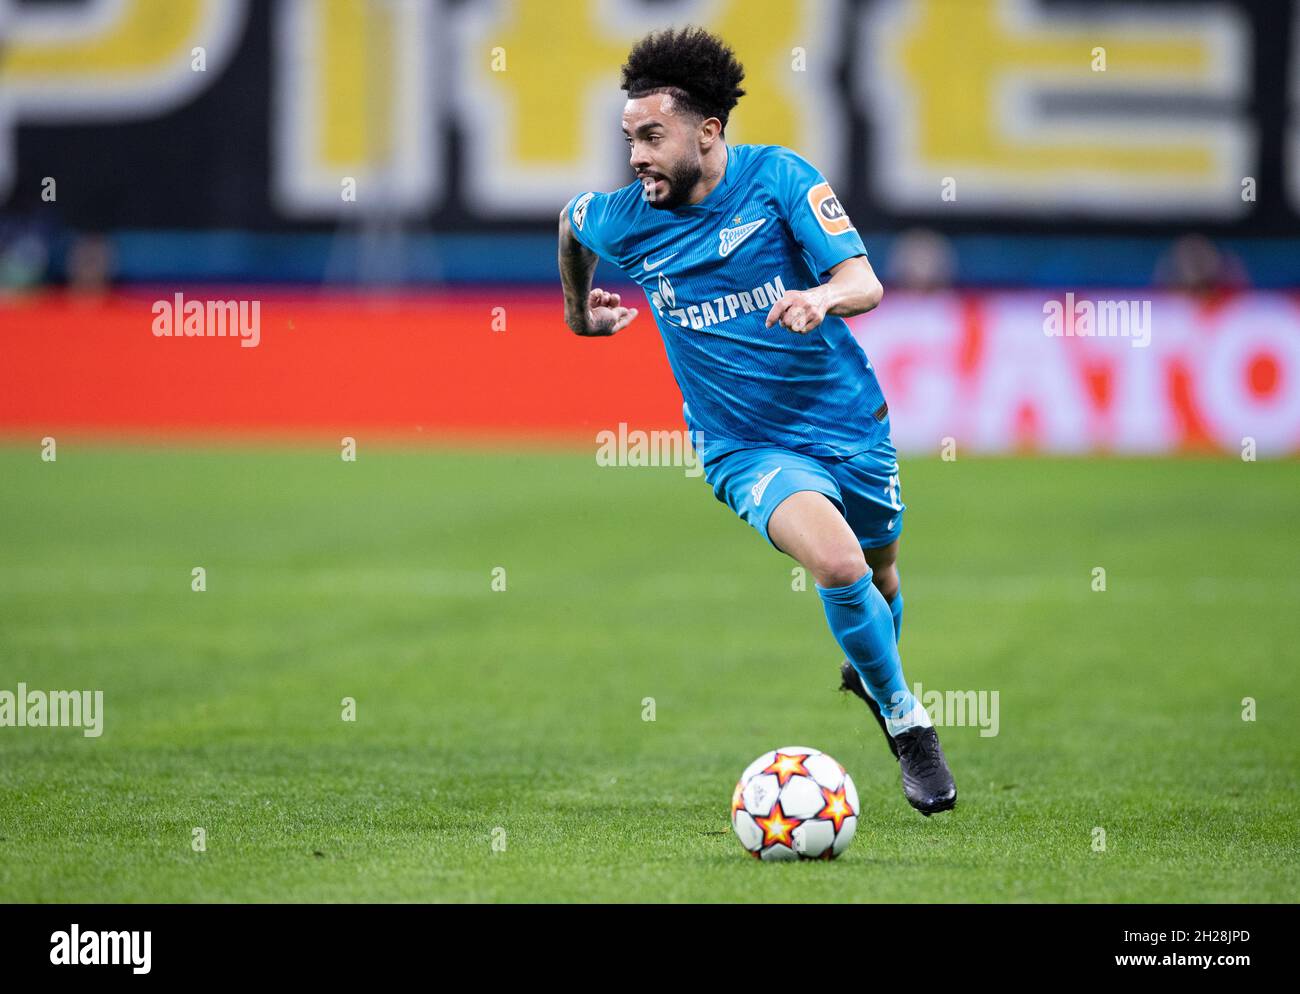 SAINT PETERSBURG, RUSSIA - OCTOBER 20: Claudinho of Zenit St. Petersburg  during the UEFA Champions League group H match between Zenit St. Petersburg  and Juventus at Gazprom Arena on October 20, 2021